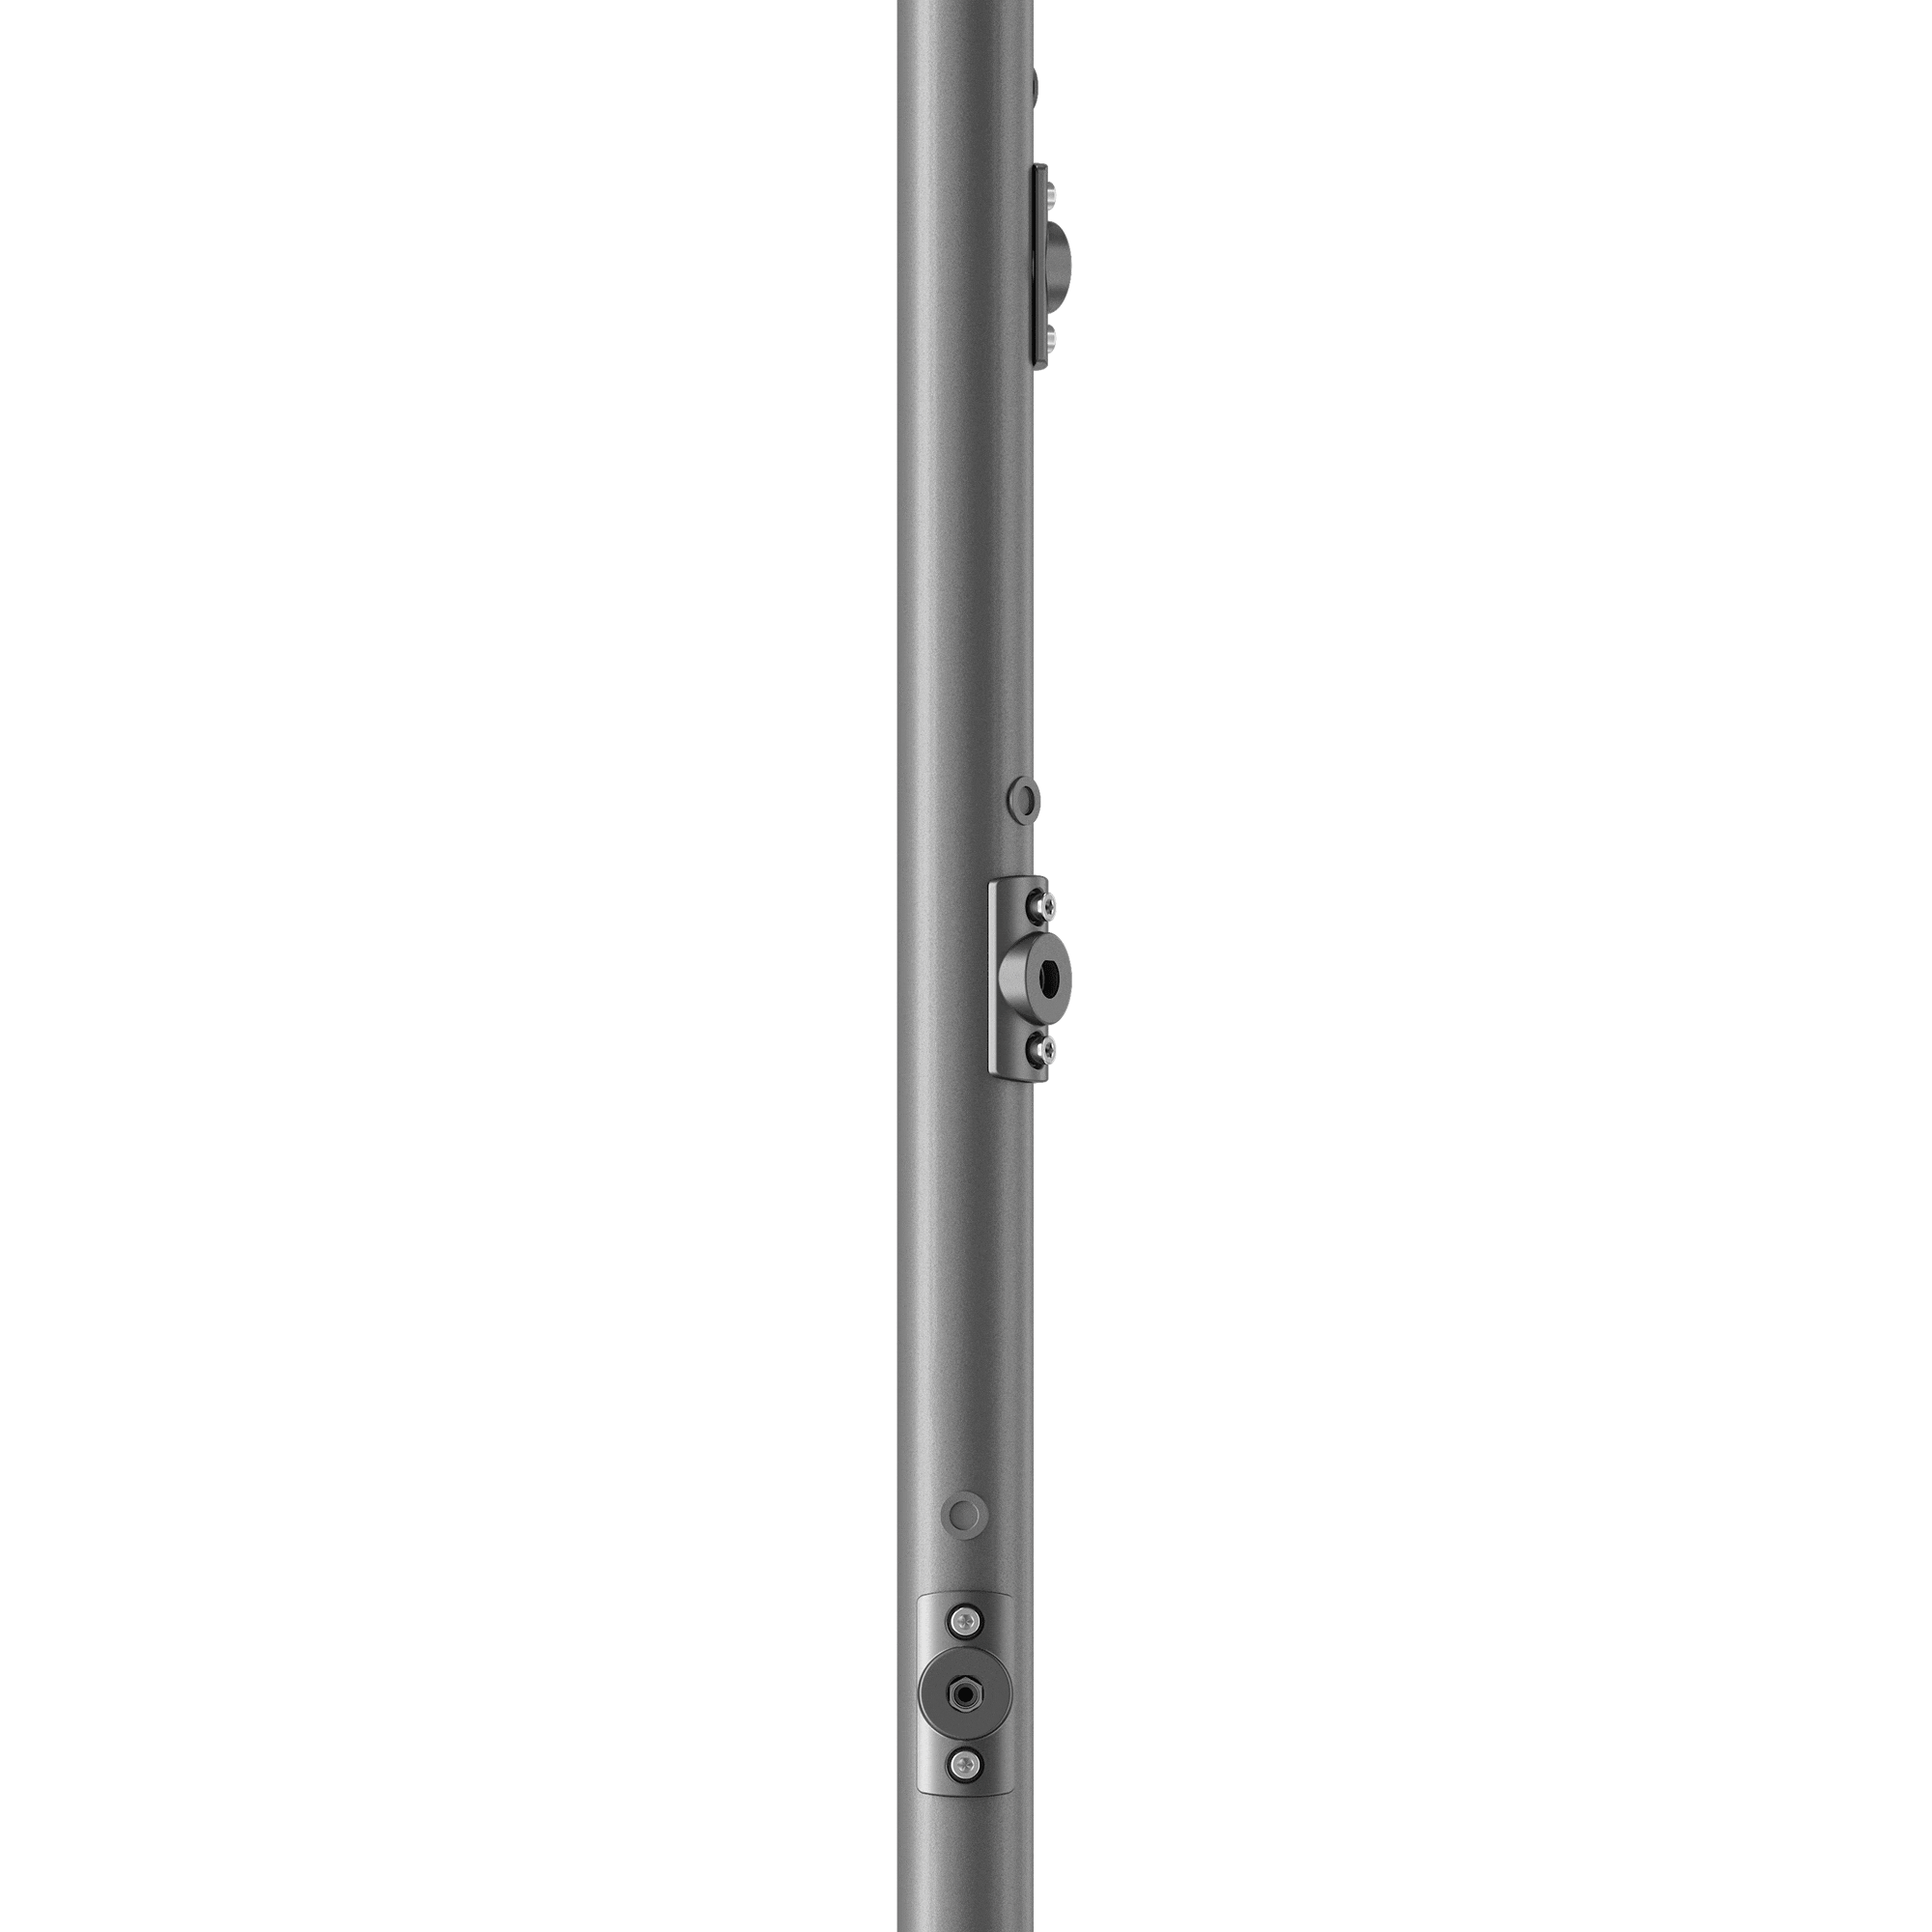 Minimal and connected pole